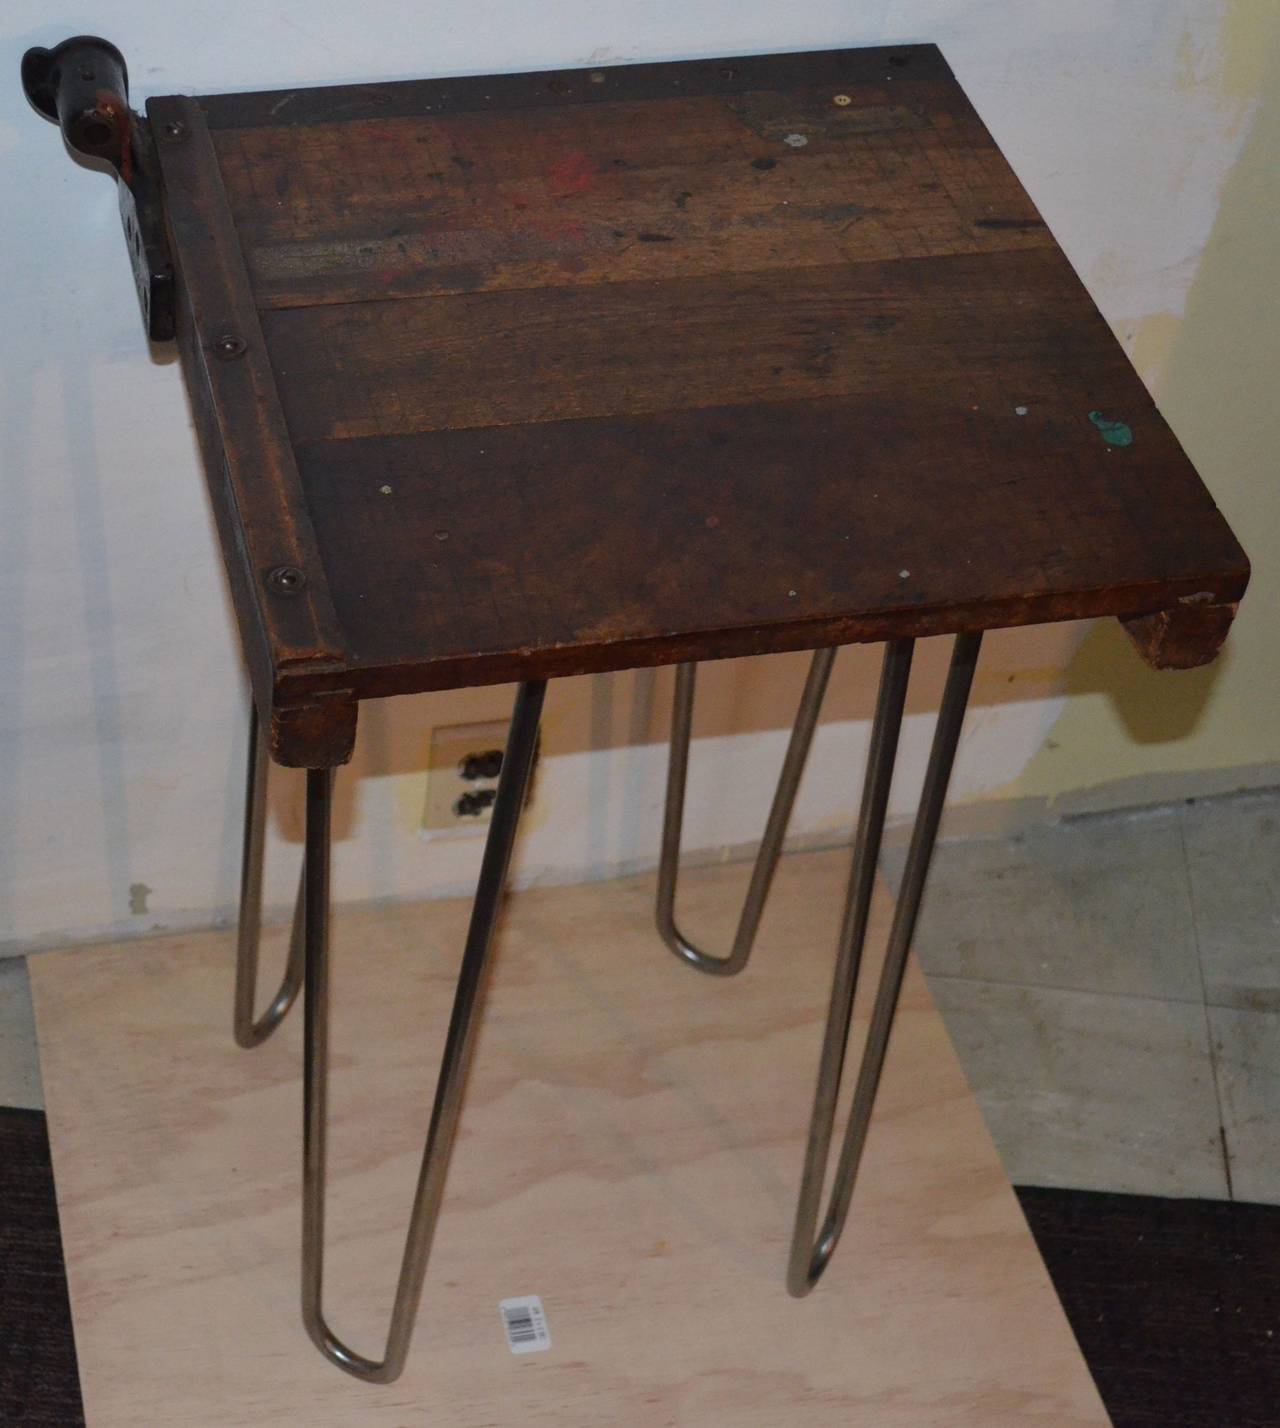 20th Century Table from Vintage Paper Cutter Mounted on Hairpin Legs